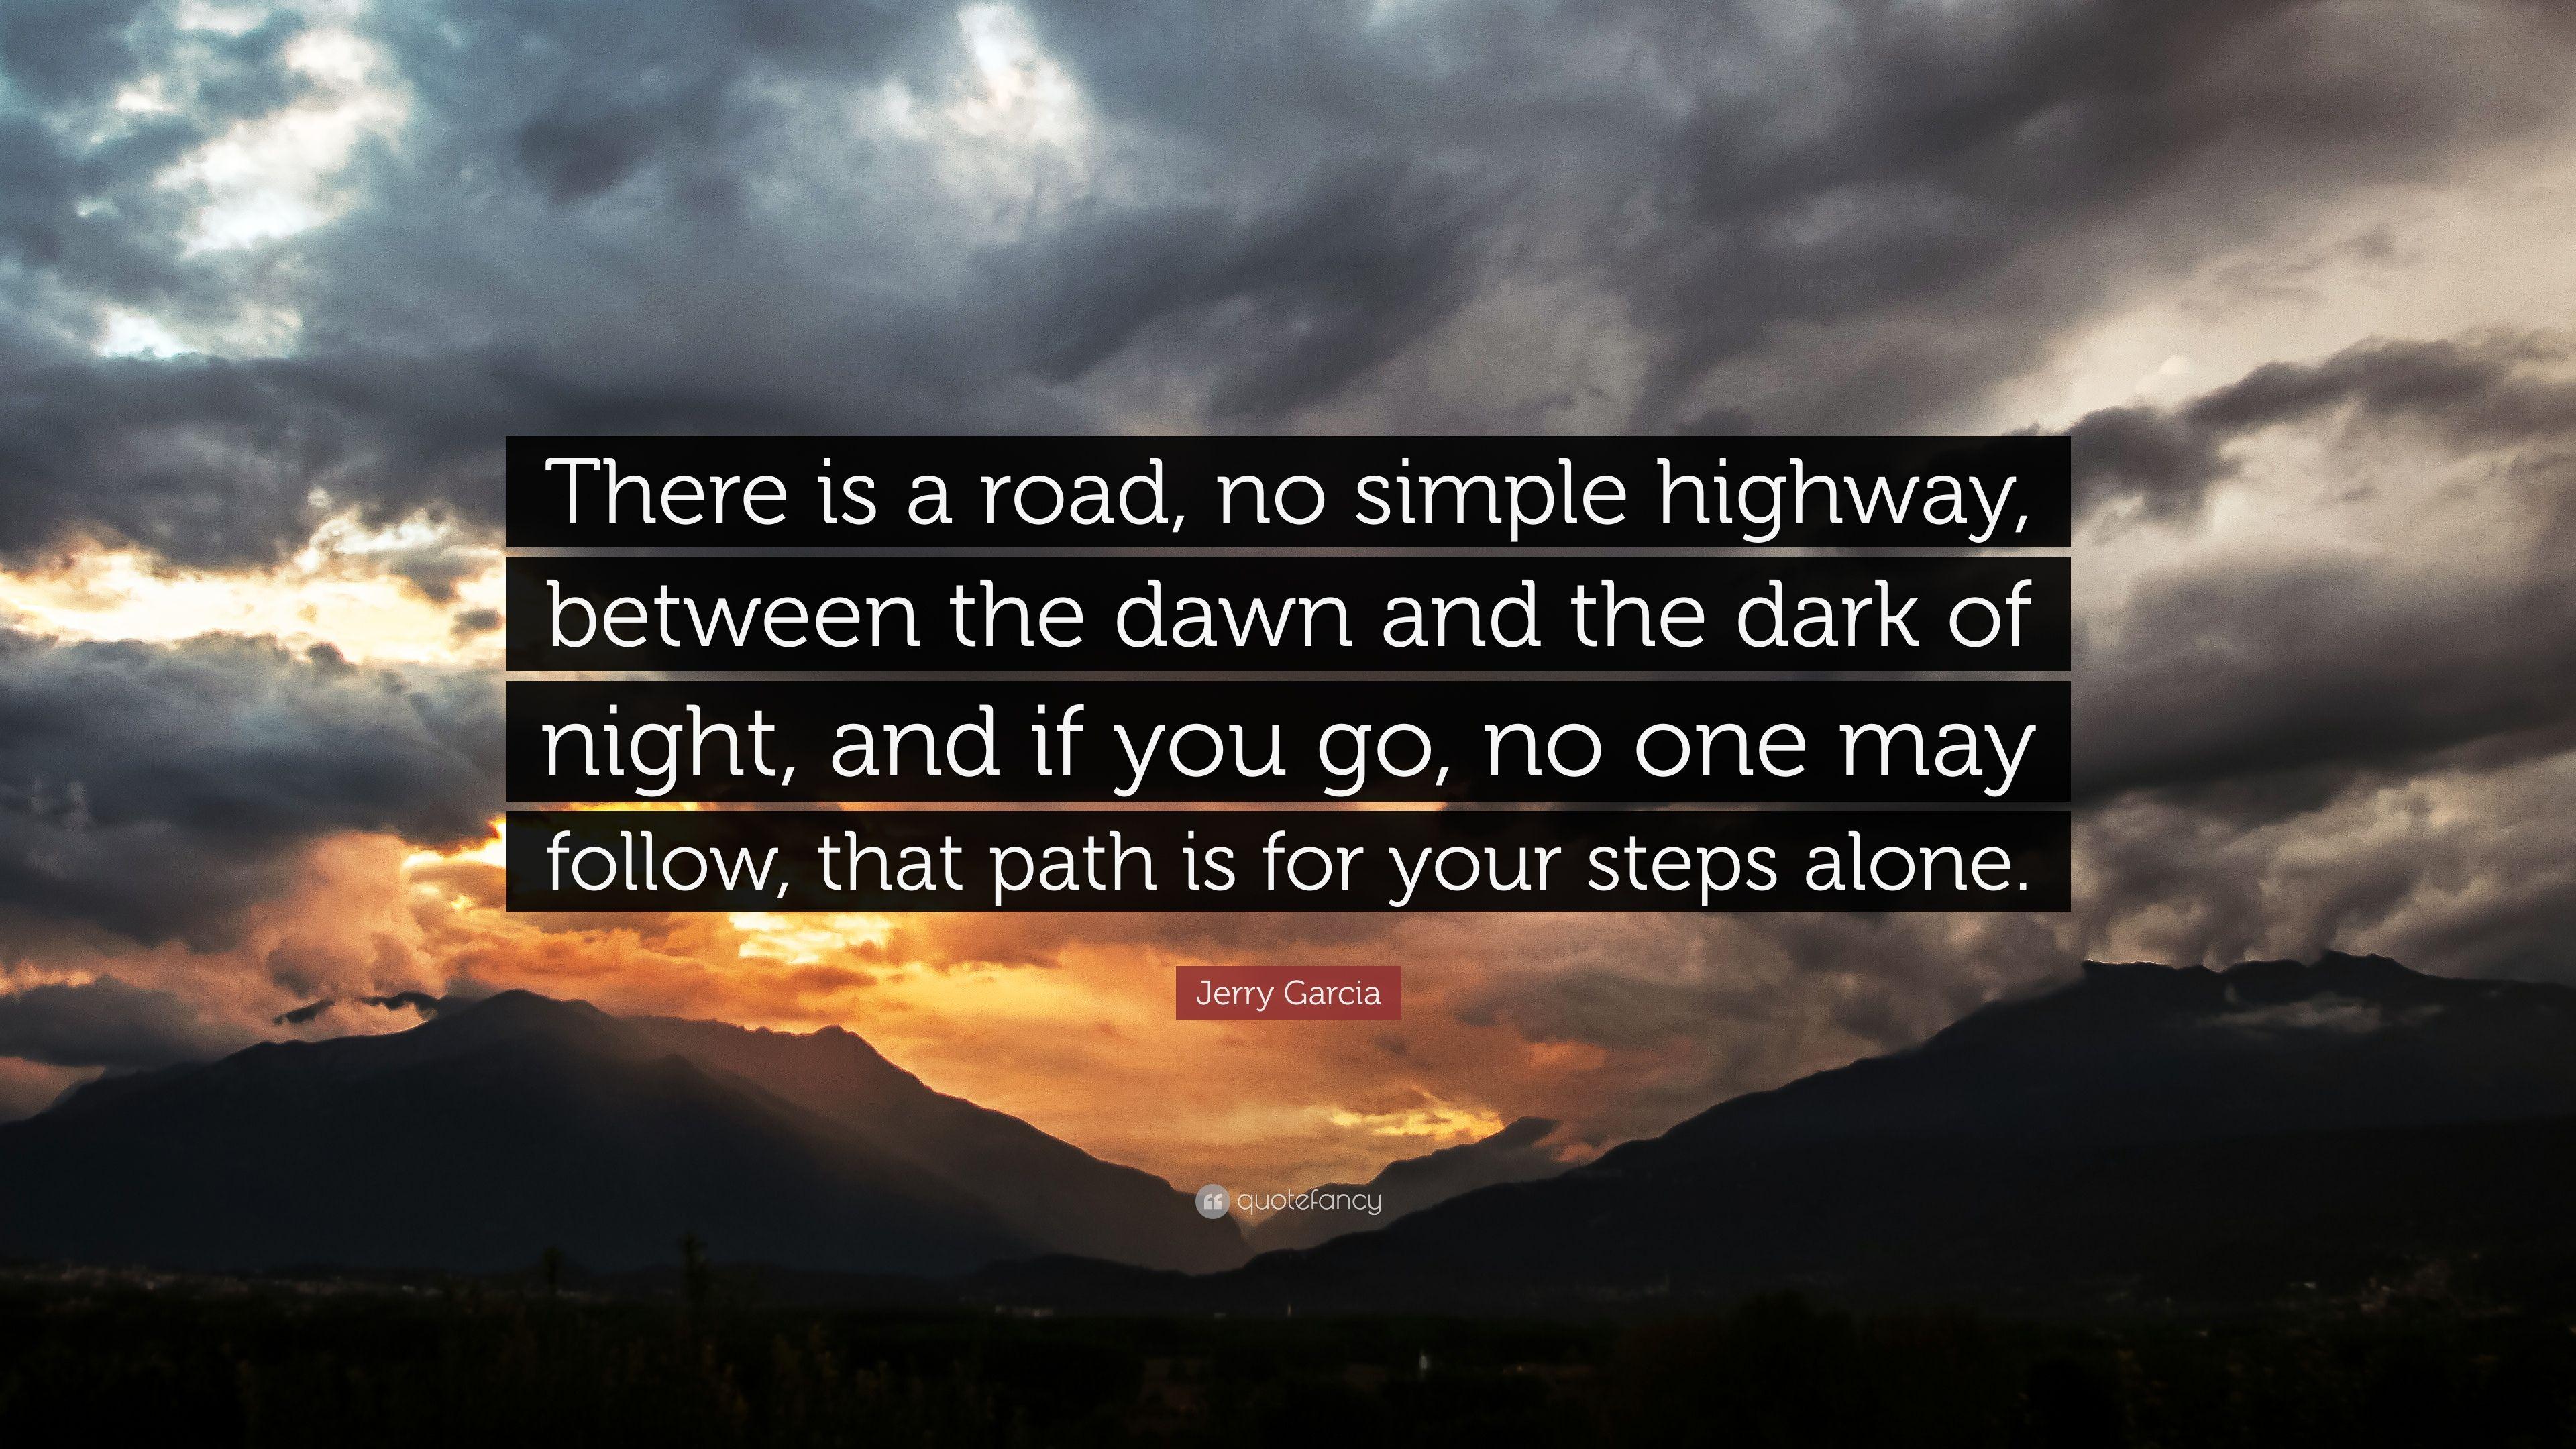 Jerry Garcia Quote: “There is a road, no simple highway, between